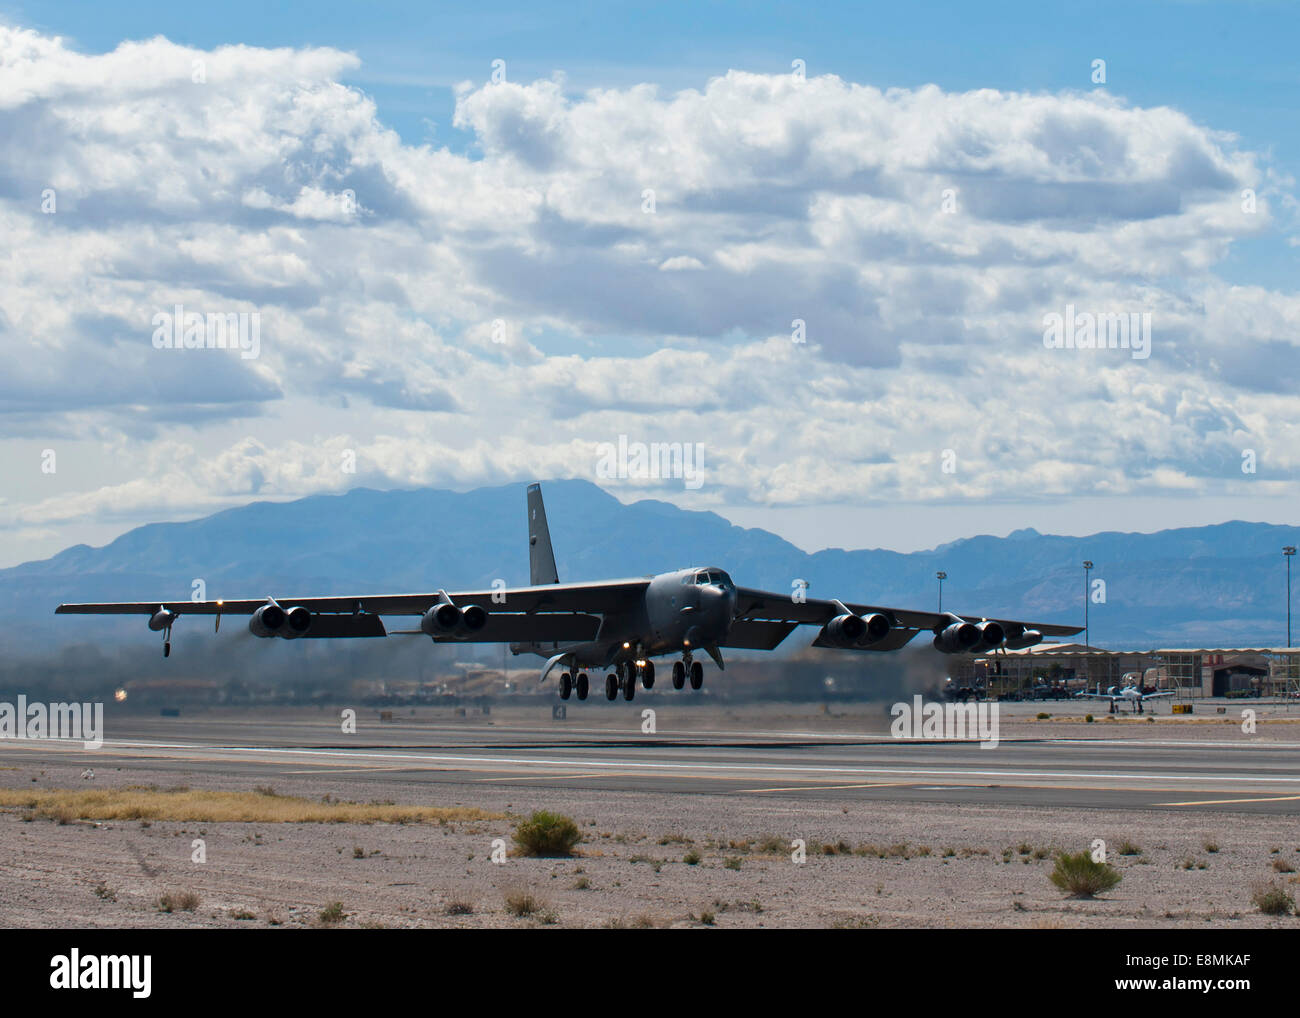 March 4, 2014 - A B-52 Stratofortress takes off during Red Flag 14-2 at Nellis Air Force Base, Nevada. Stock Photo